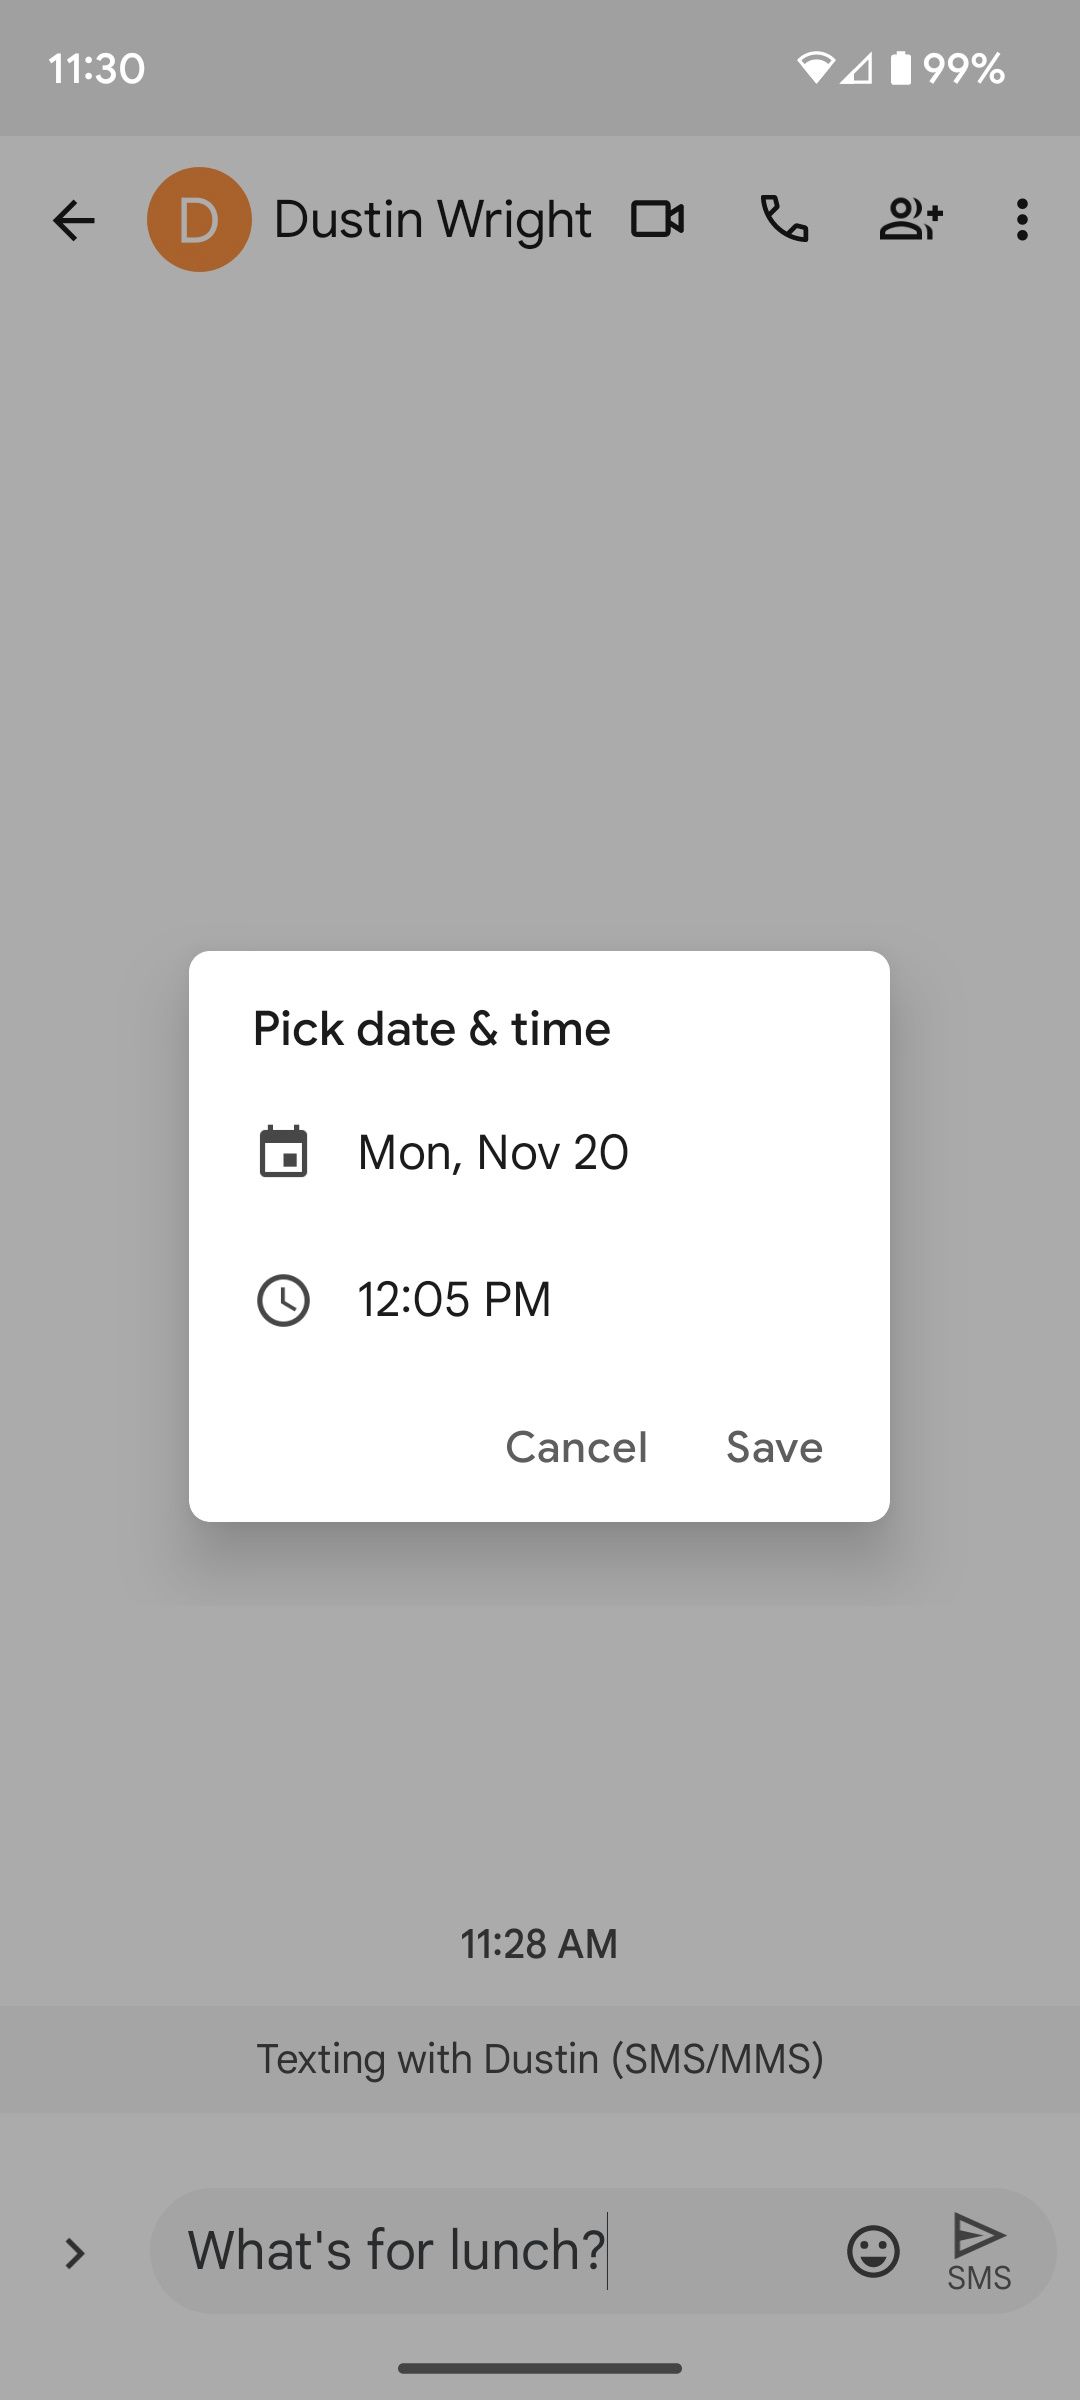 Confirming to schedule a message in Google Messages